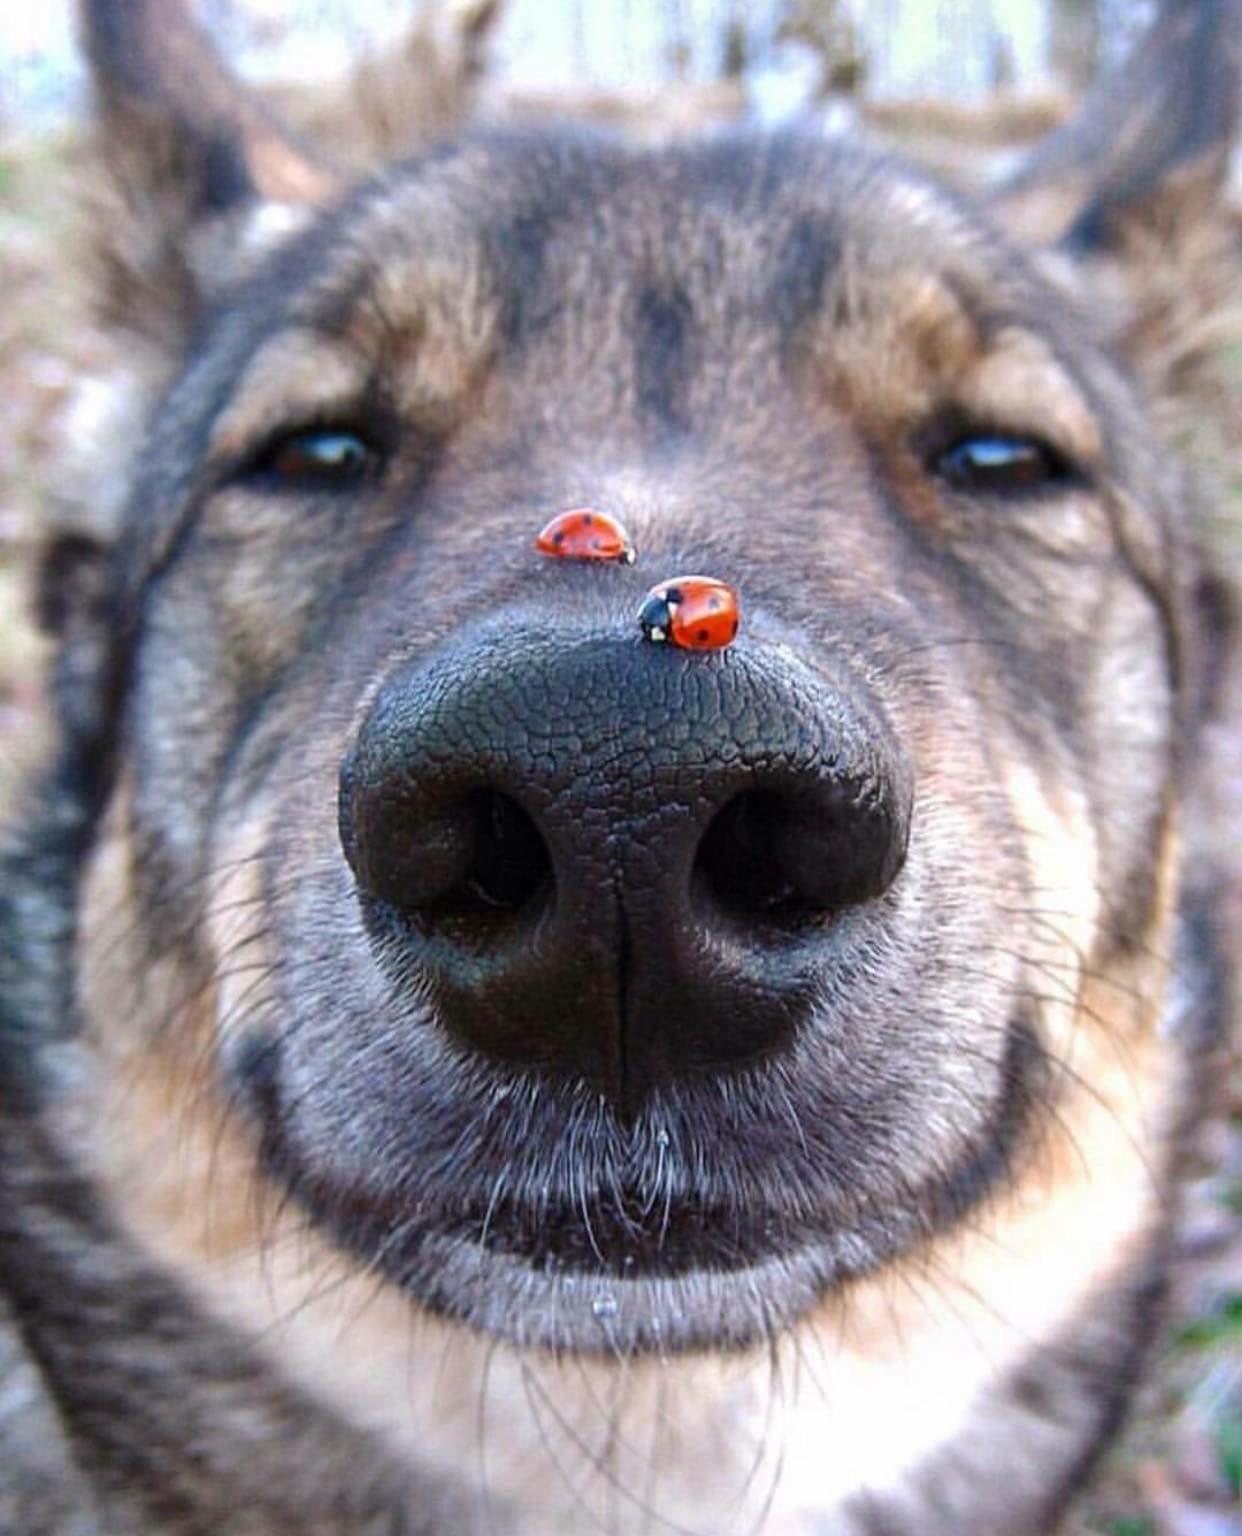 daily dose of pics and memes - ladybirds dog's mouth